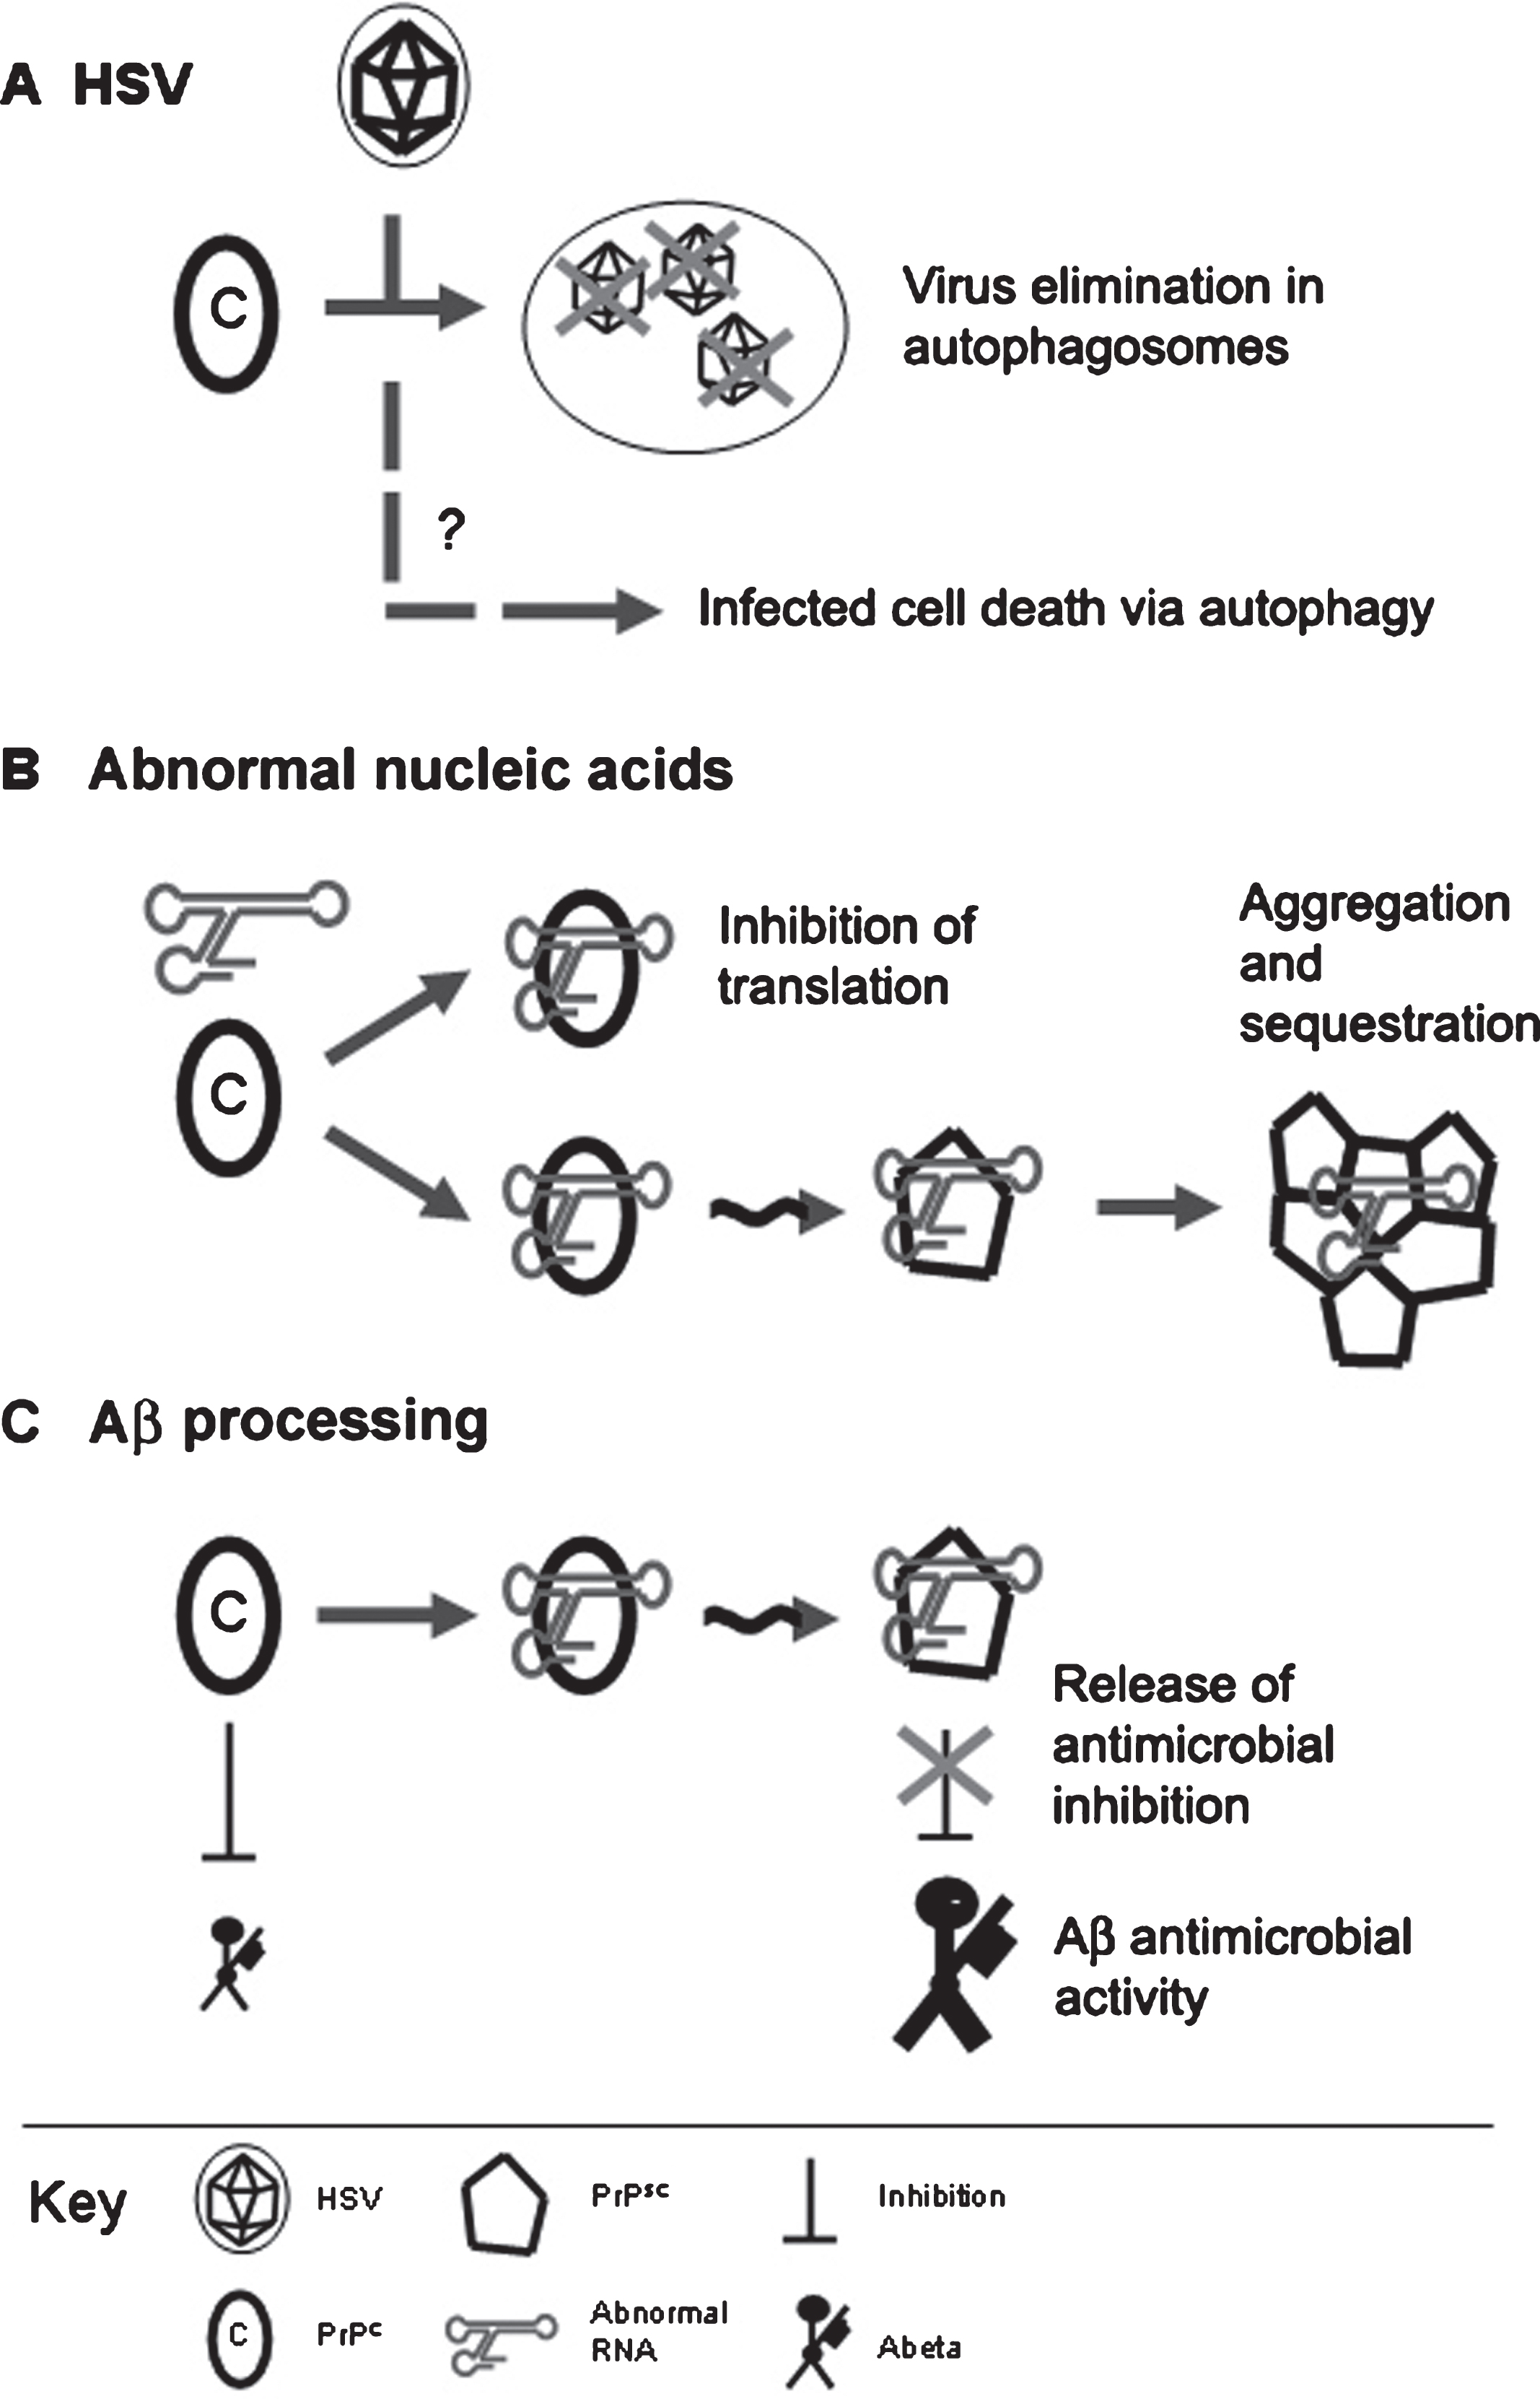 Antimicrobial Activities of PRNP. In addition to the listed categories, other mechanisms are likely to include the generation of reactive oxygen species, and binding to immunomodulatory molecules including APOE and formyl peptide receptors is likely to direct the recruitment of other actors in innate immunity. Direct binding to Aβ (not depicted) and potential interactions with other antimicrobial peptides that bind to Aβ (e.g., LL-37, α-synuclein) add a further dimension. Abbreviation: HSV, herpes simplex virus type 1.